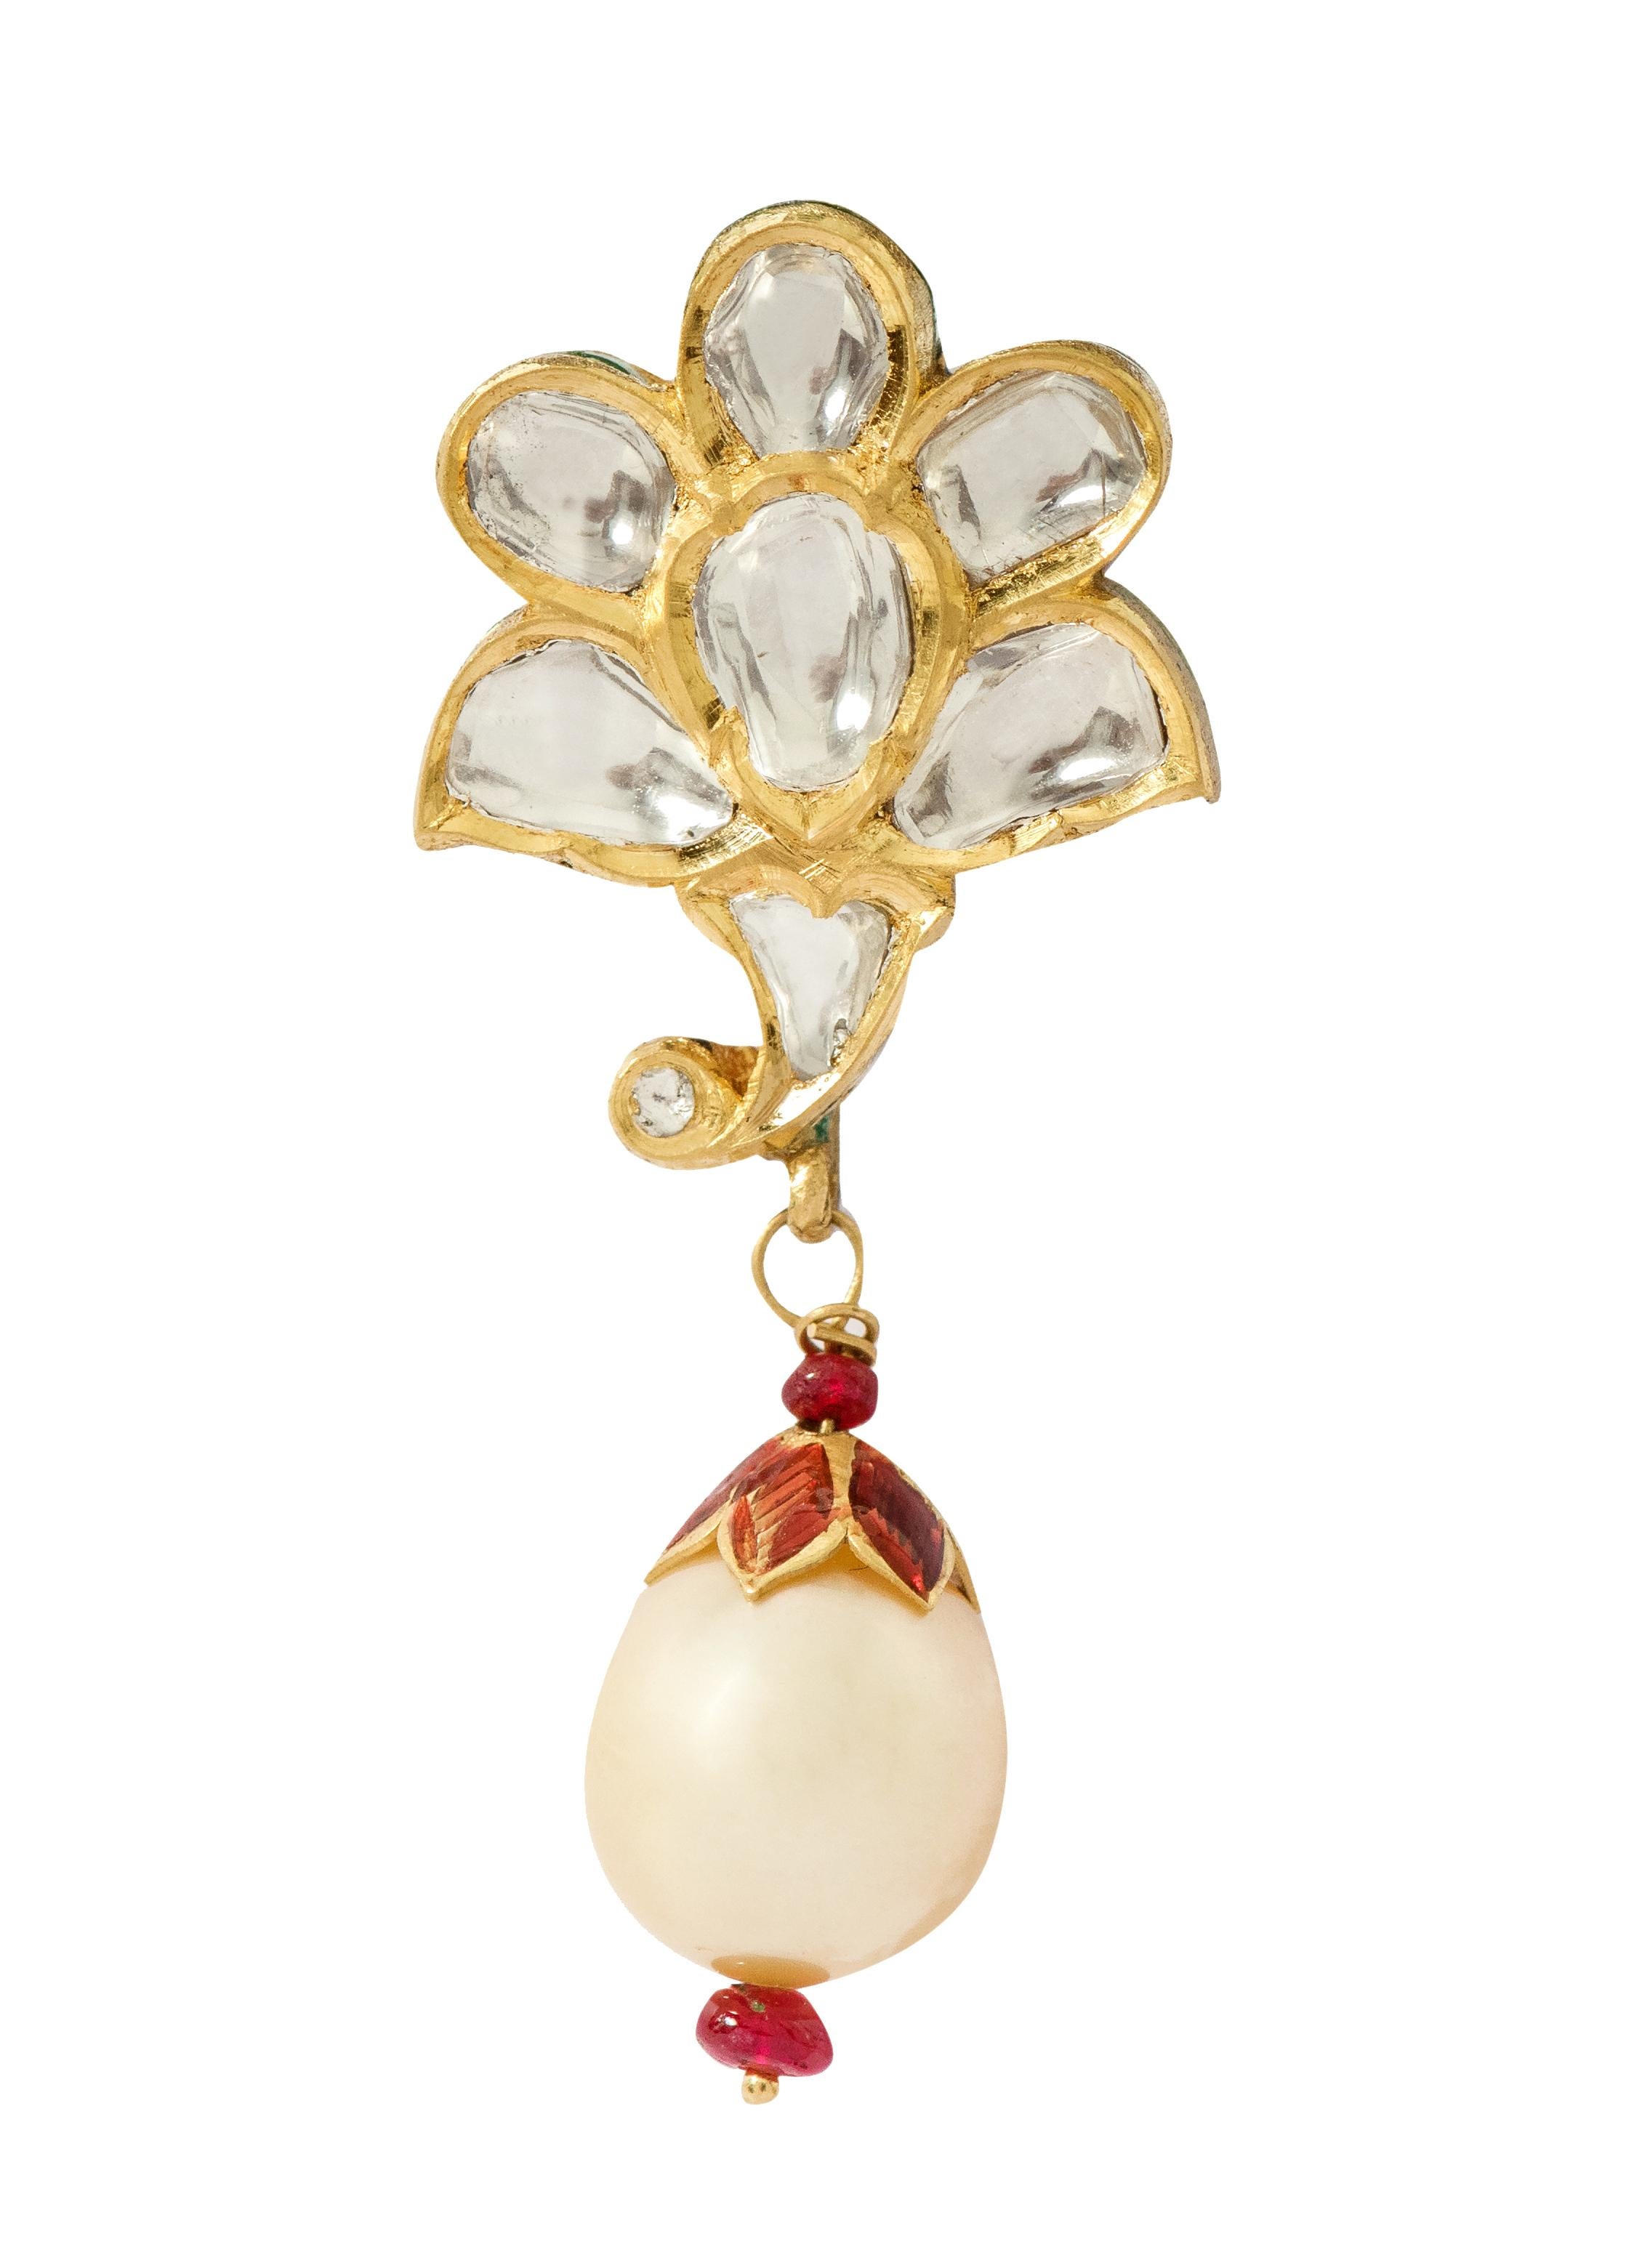 Uncut 22 Karat Gold Diamond and Pearl Drop Earring Handcrafted with Multi-Color Enamel For Sale